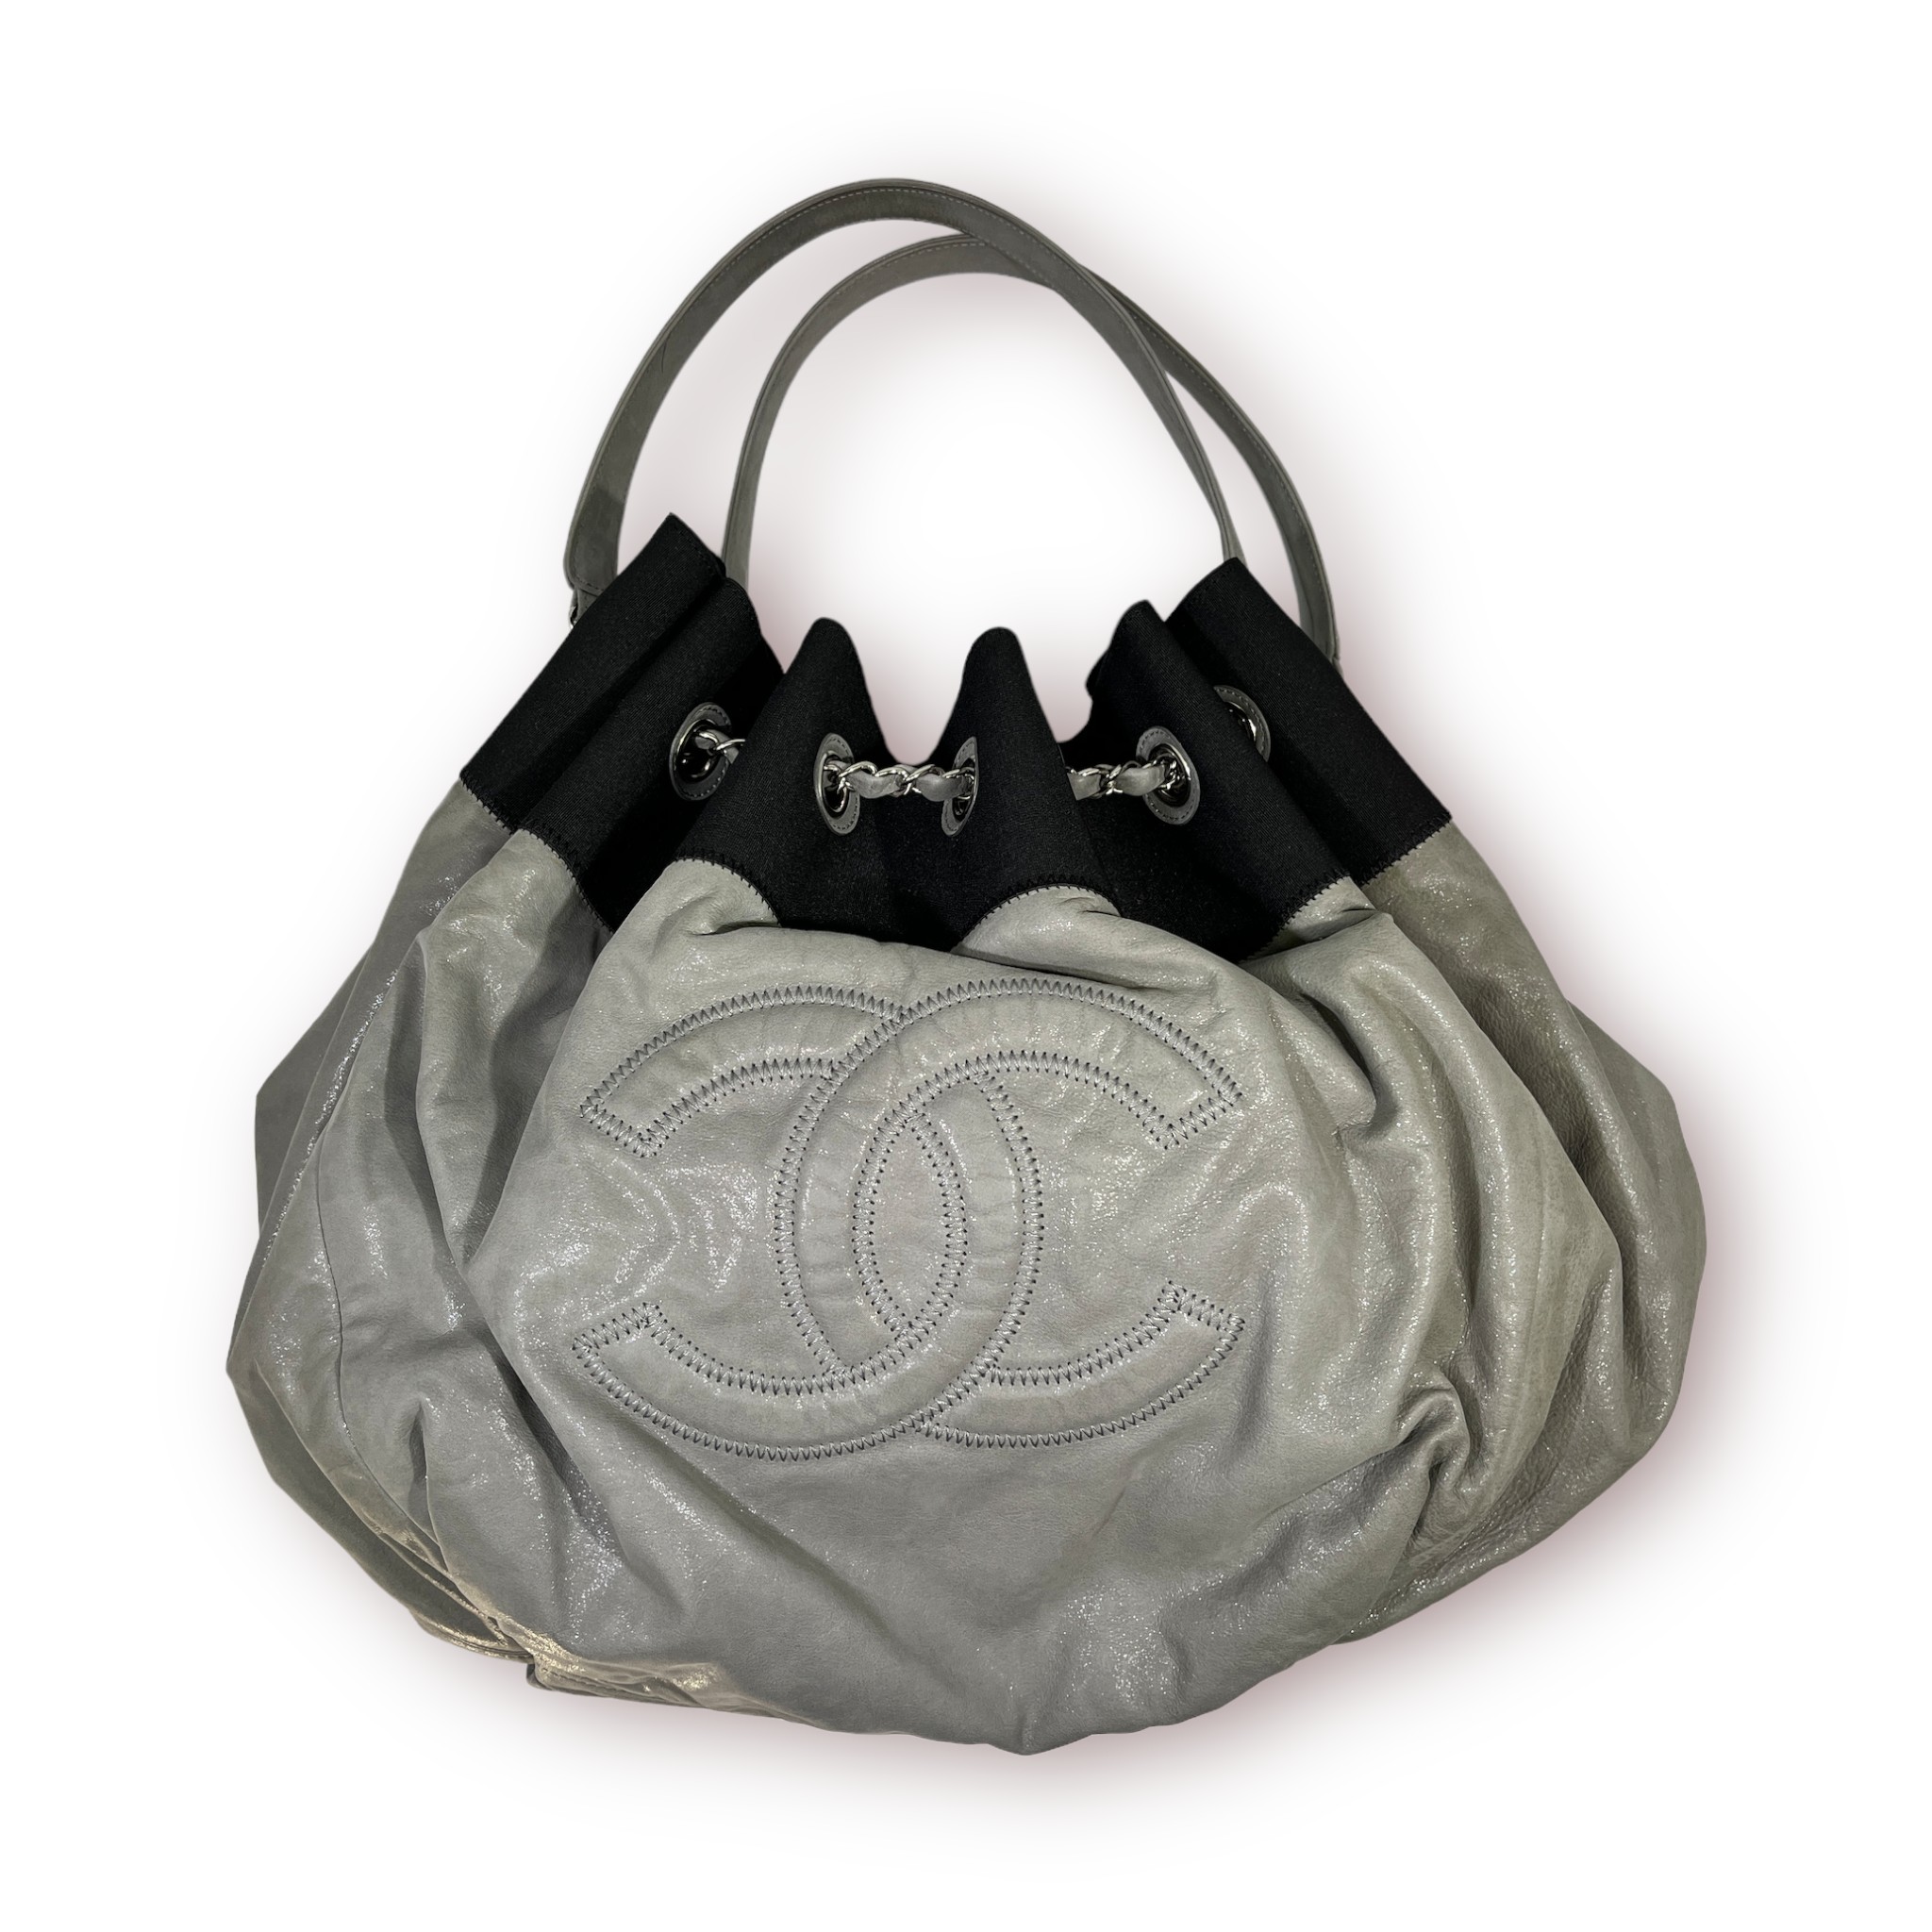 Chanel chain Coco Cabas GM tote bag, chain drawstring, grey and charcoal, detailed with a large